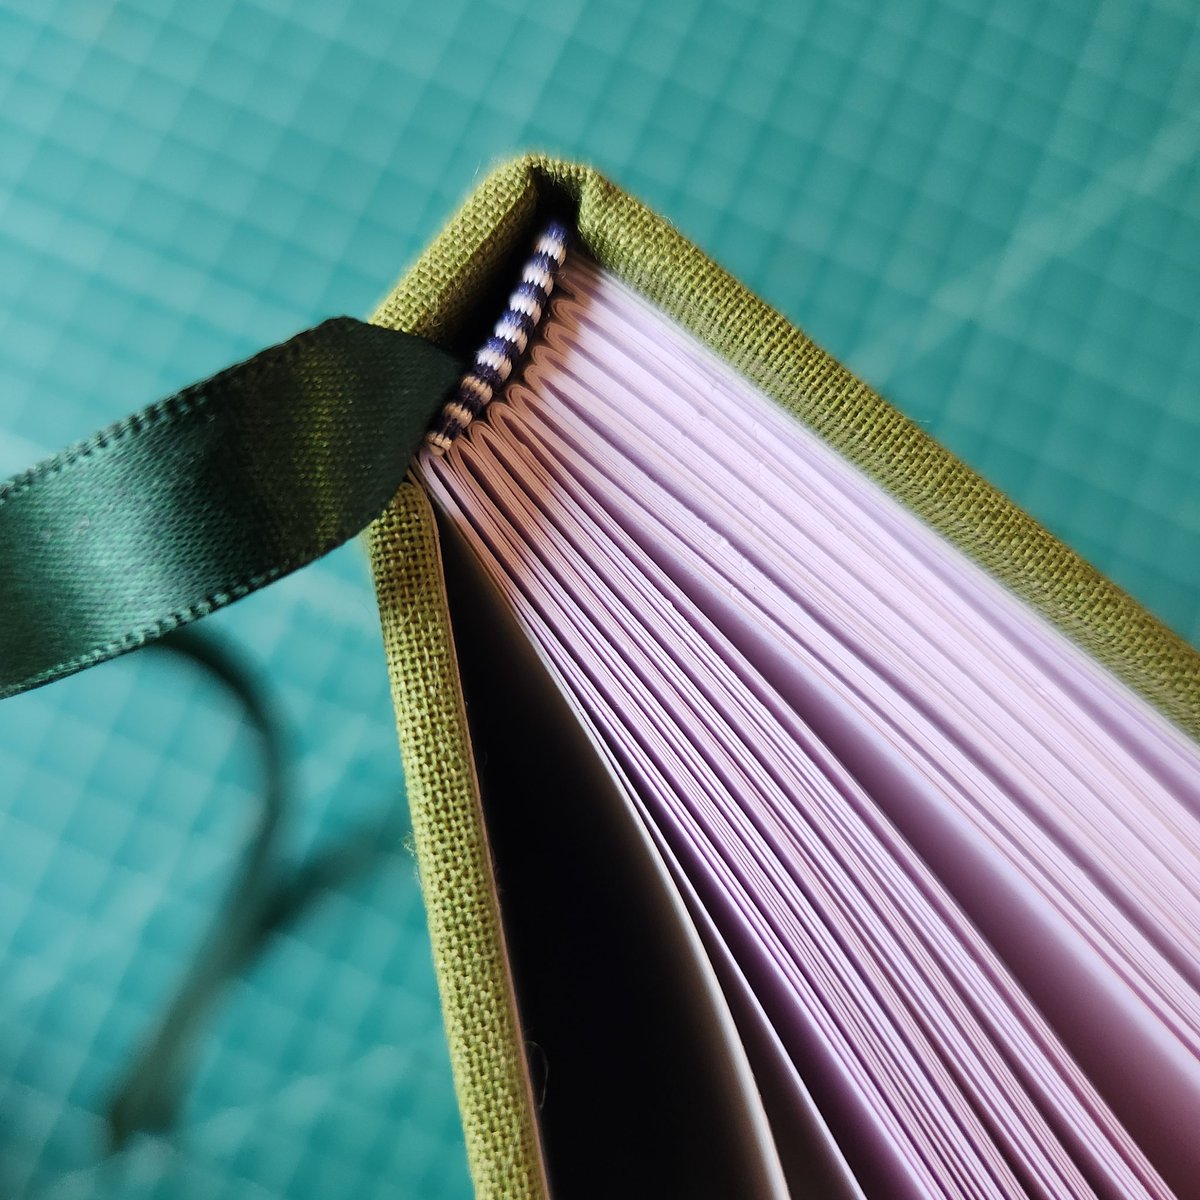 I'm not completely happy with this one, but it will have to do. I really want to apprentice under someone who knows how to case bind with a little more precision than I currently know how to muster. #ammaking #ambookbinding #bookarts #bookbinding